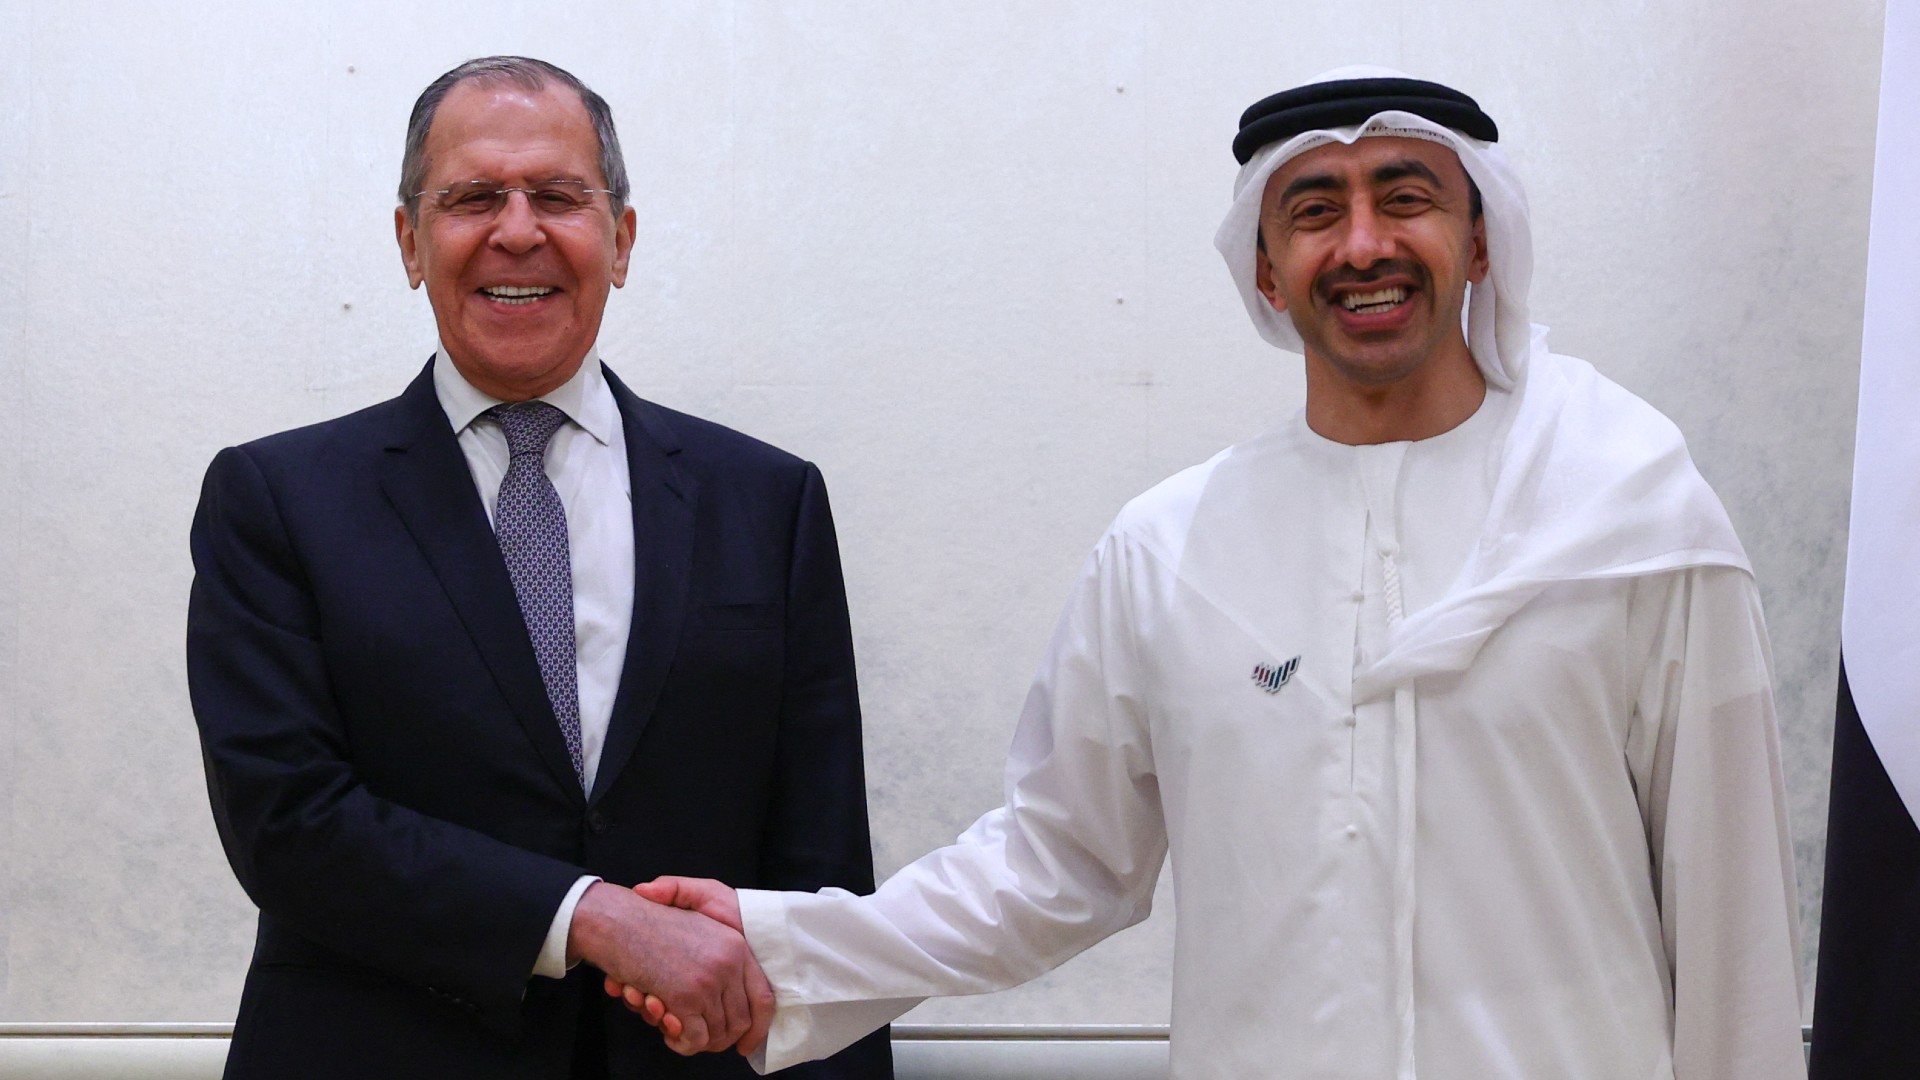 Russian Foreign Minister Sergei Lavrov meets with his Emirati counterpart Sheikh Abdullah bin Zayed al-Nahayan in Abu Dhabi on March 9, 2021.